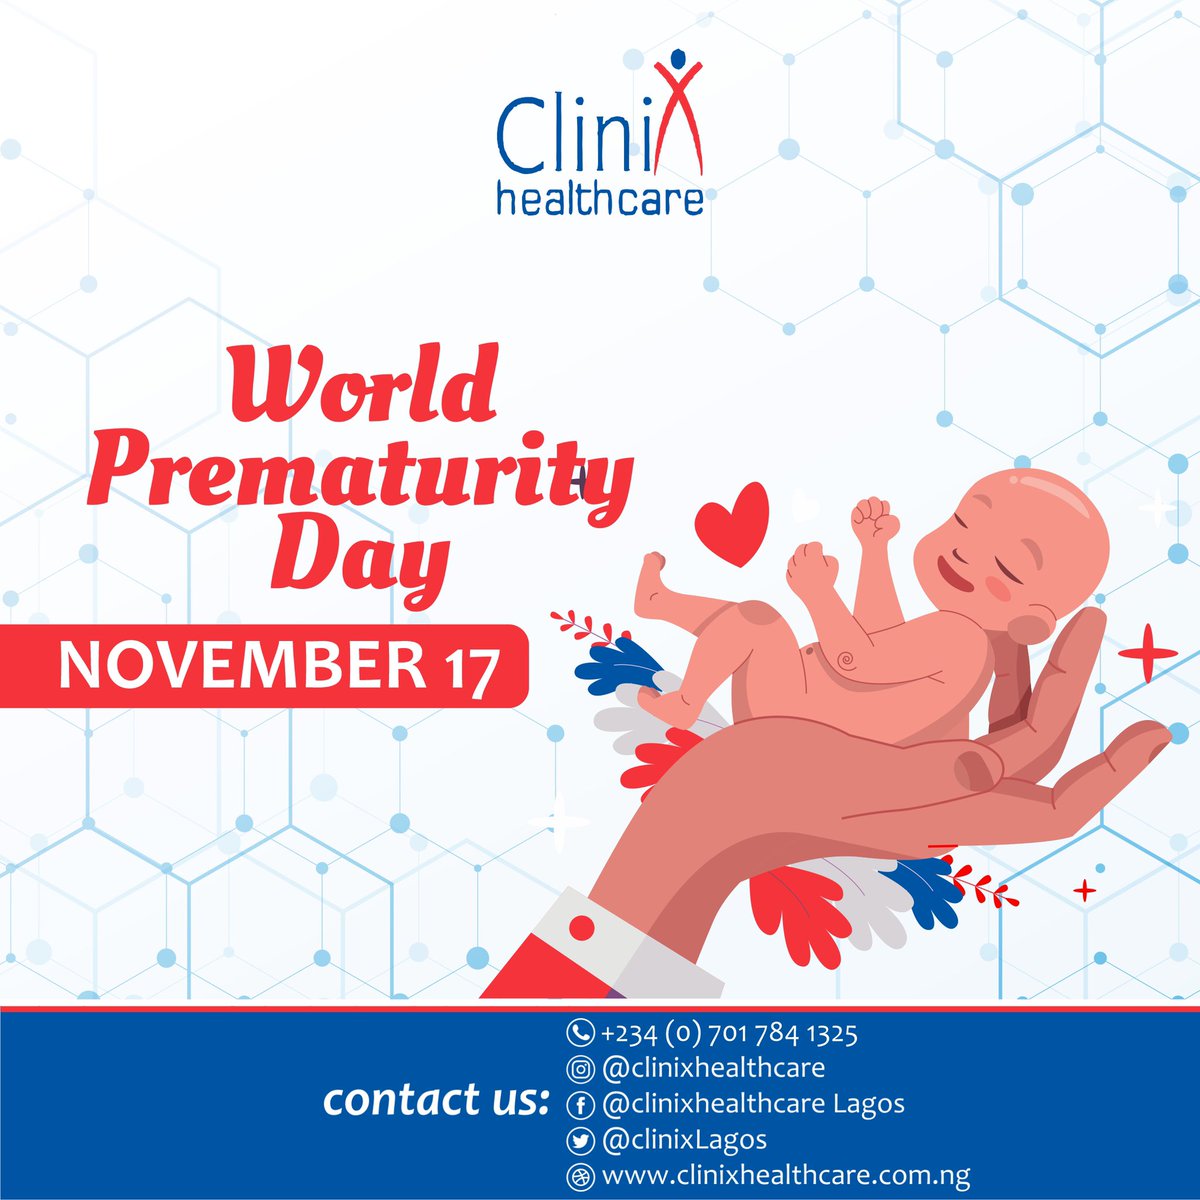 Here some things you can do before and during pregnancy to help reduce your risk for preterm labor and premature birth:
1. Schedule a preconception checkup with your health care provider to make sure your body is ready for pregnancy. 👇🏽
#WorldPrematurityDay2022